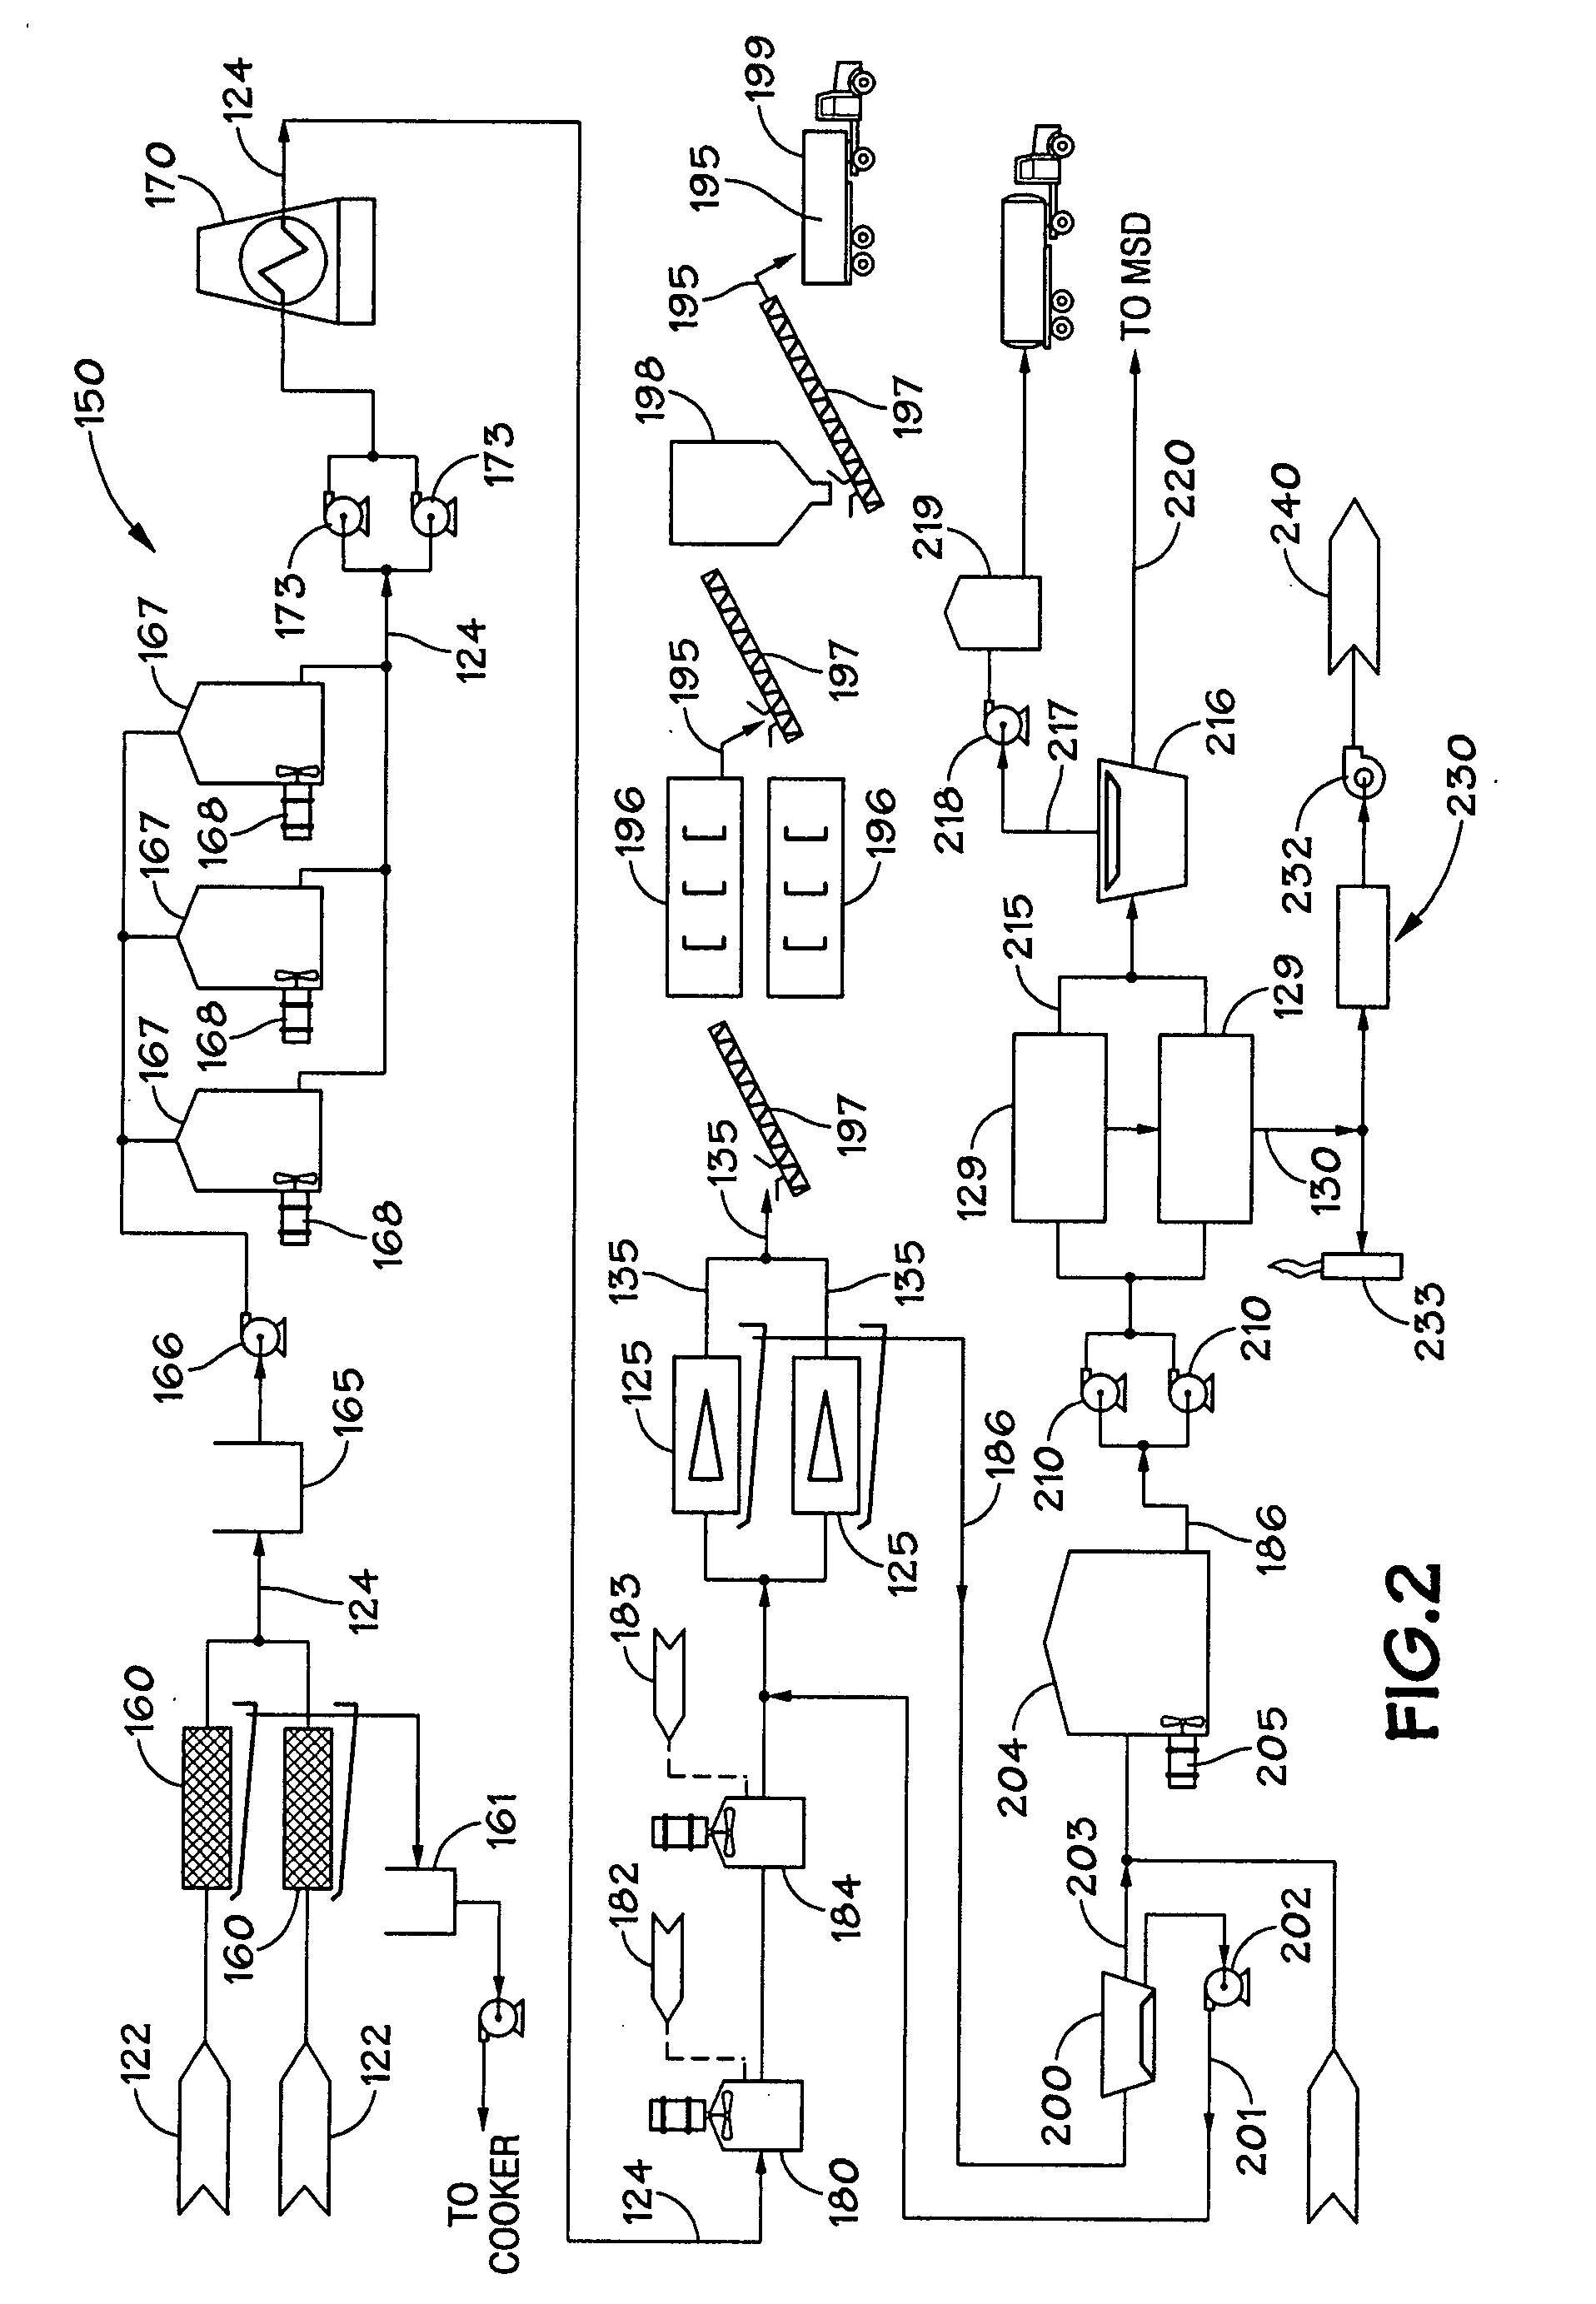 Method and apparatus for the treatment of byproducts from ethanol and spirits production